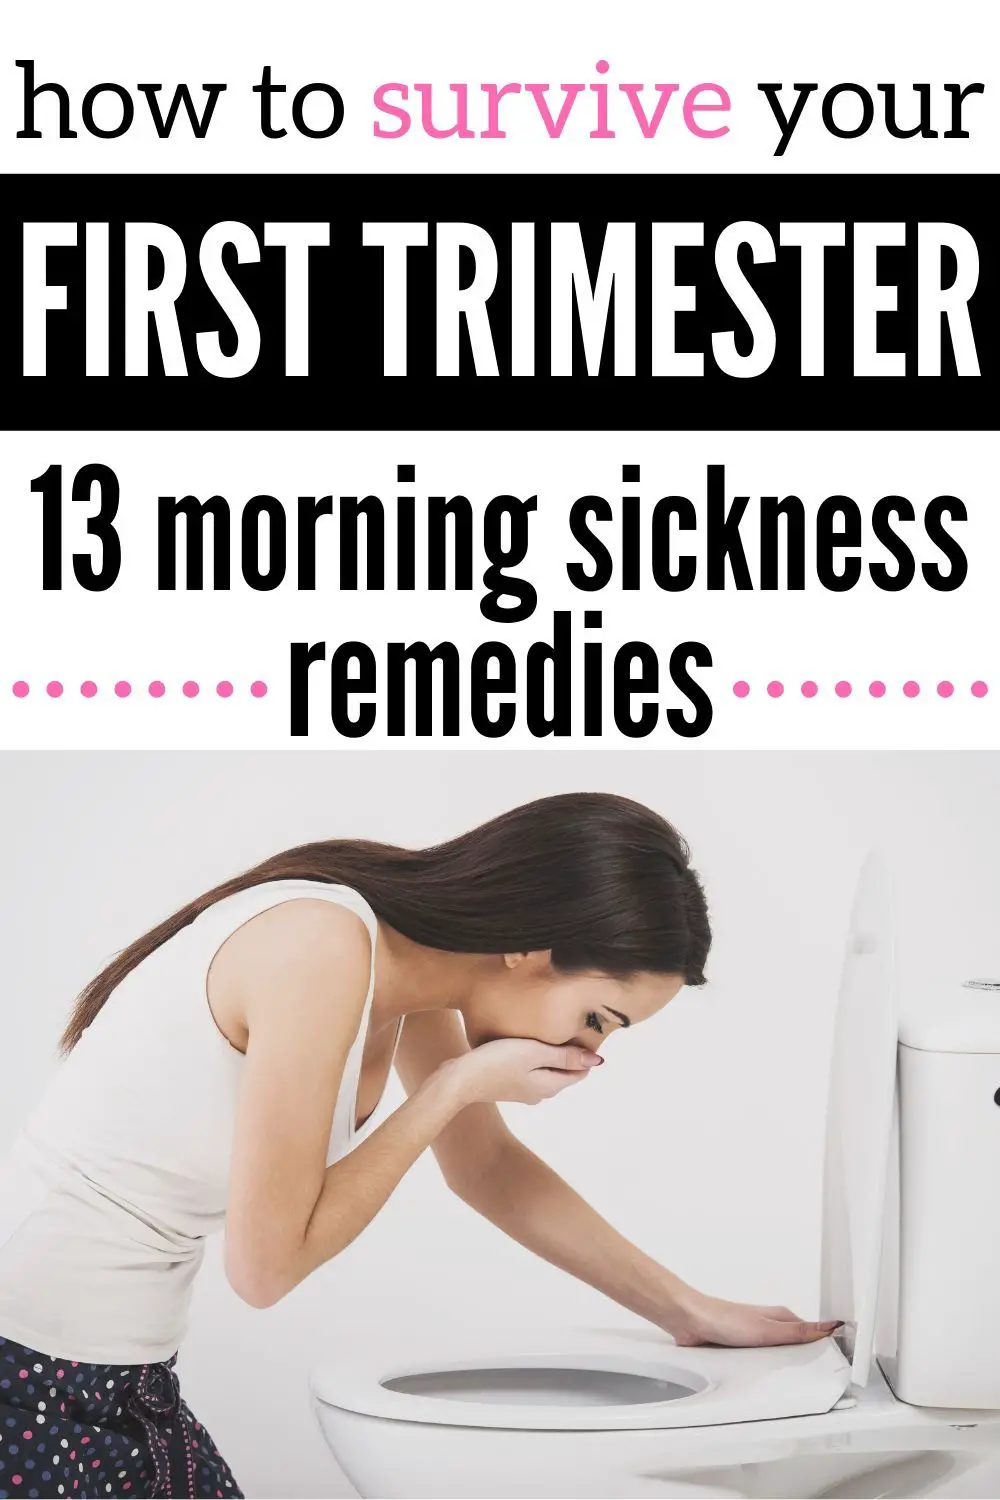 8 home remedies for morning sickness